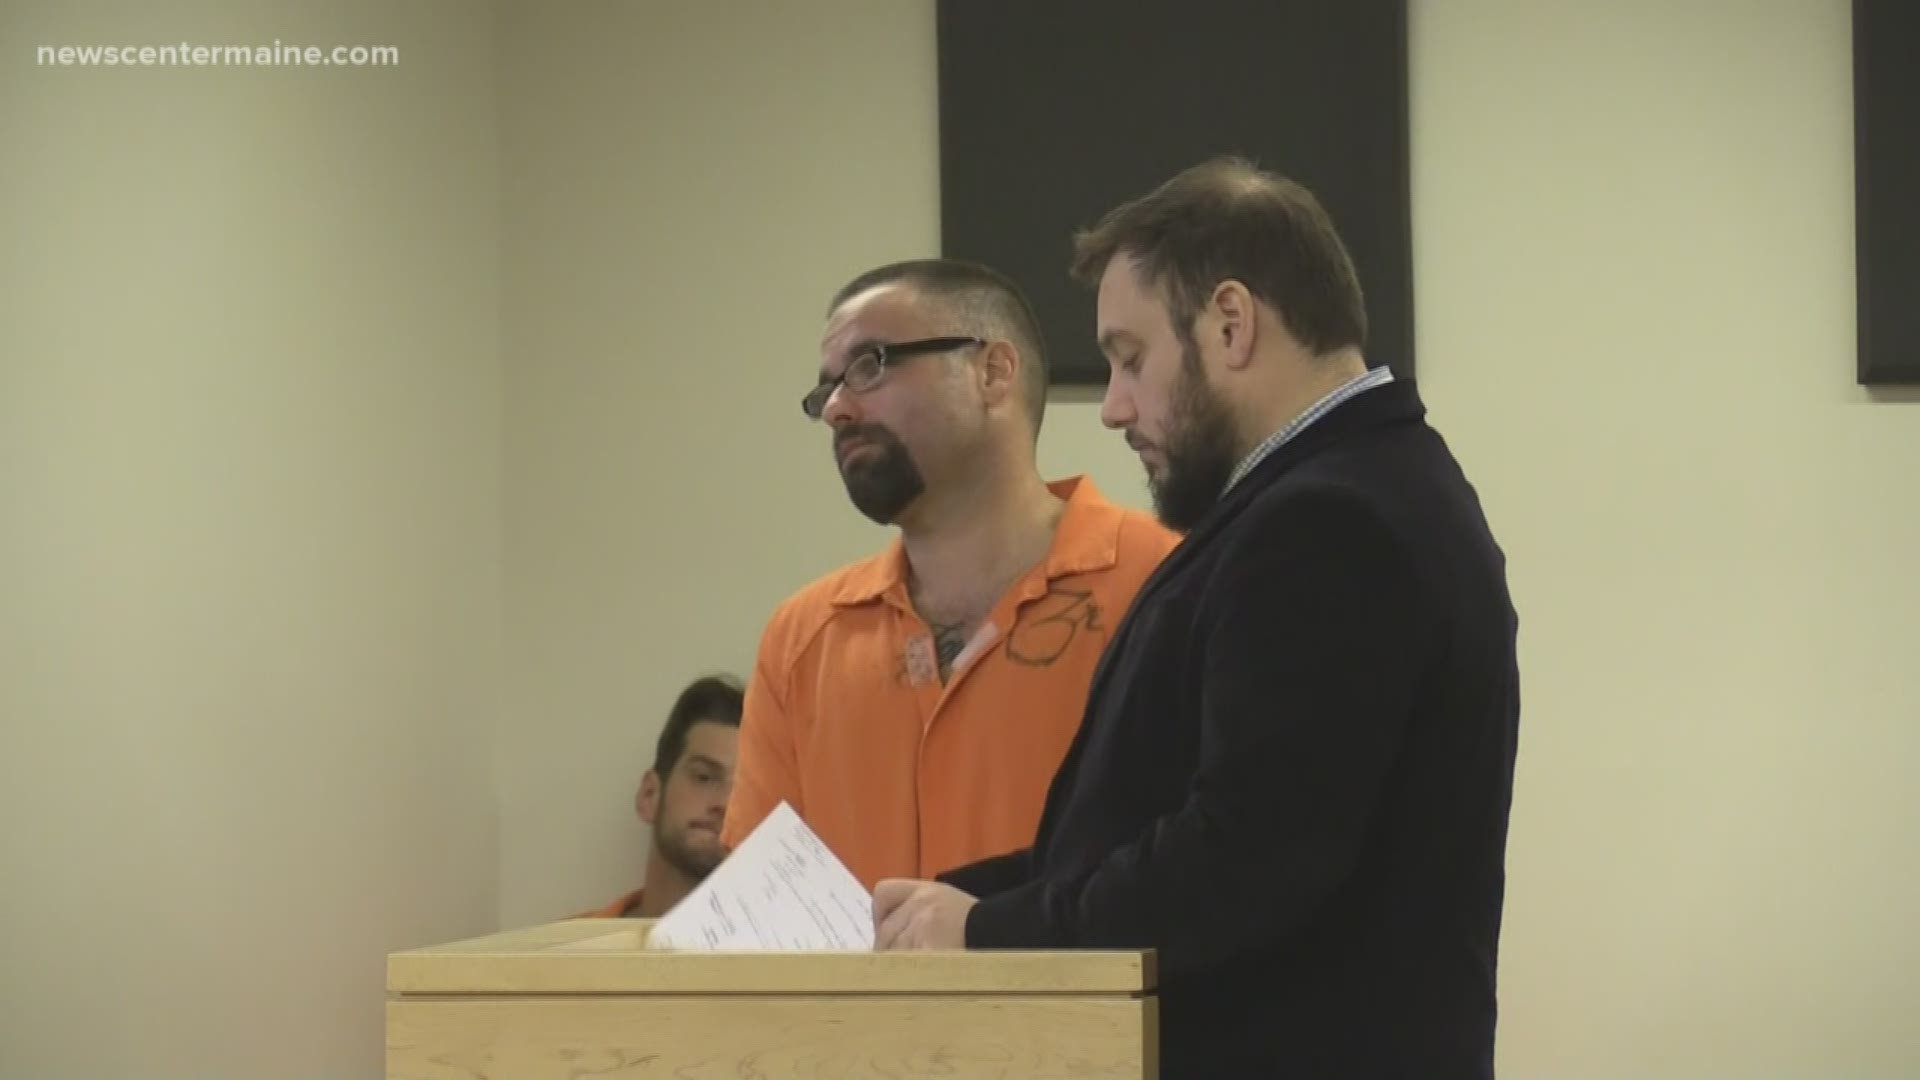 Father charged in connection to toddler's death appears in court (Shane Smith, Winterport)